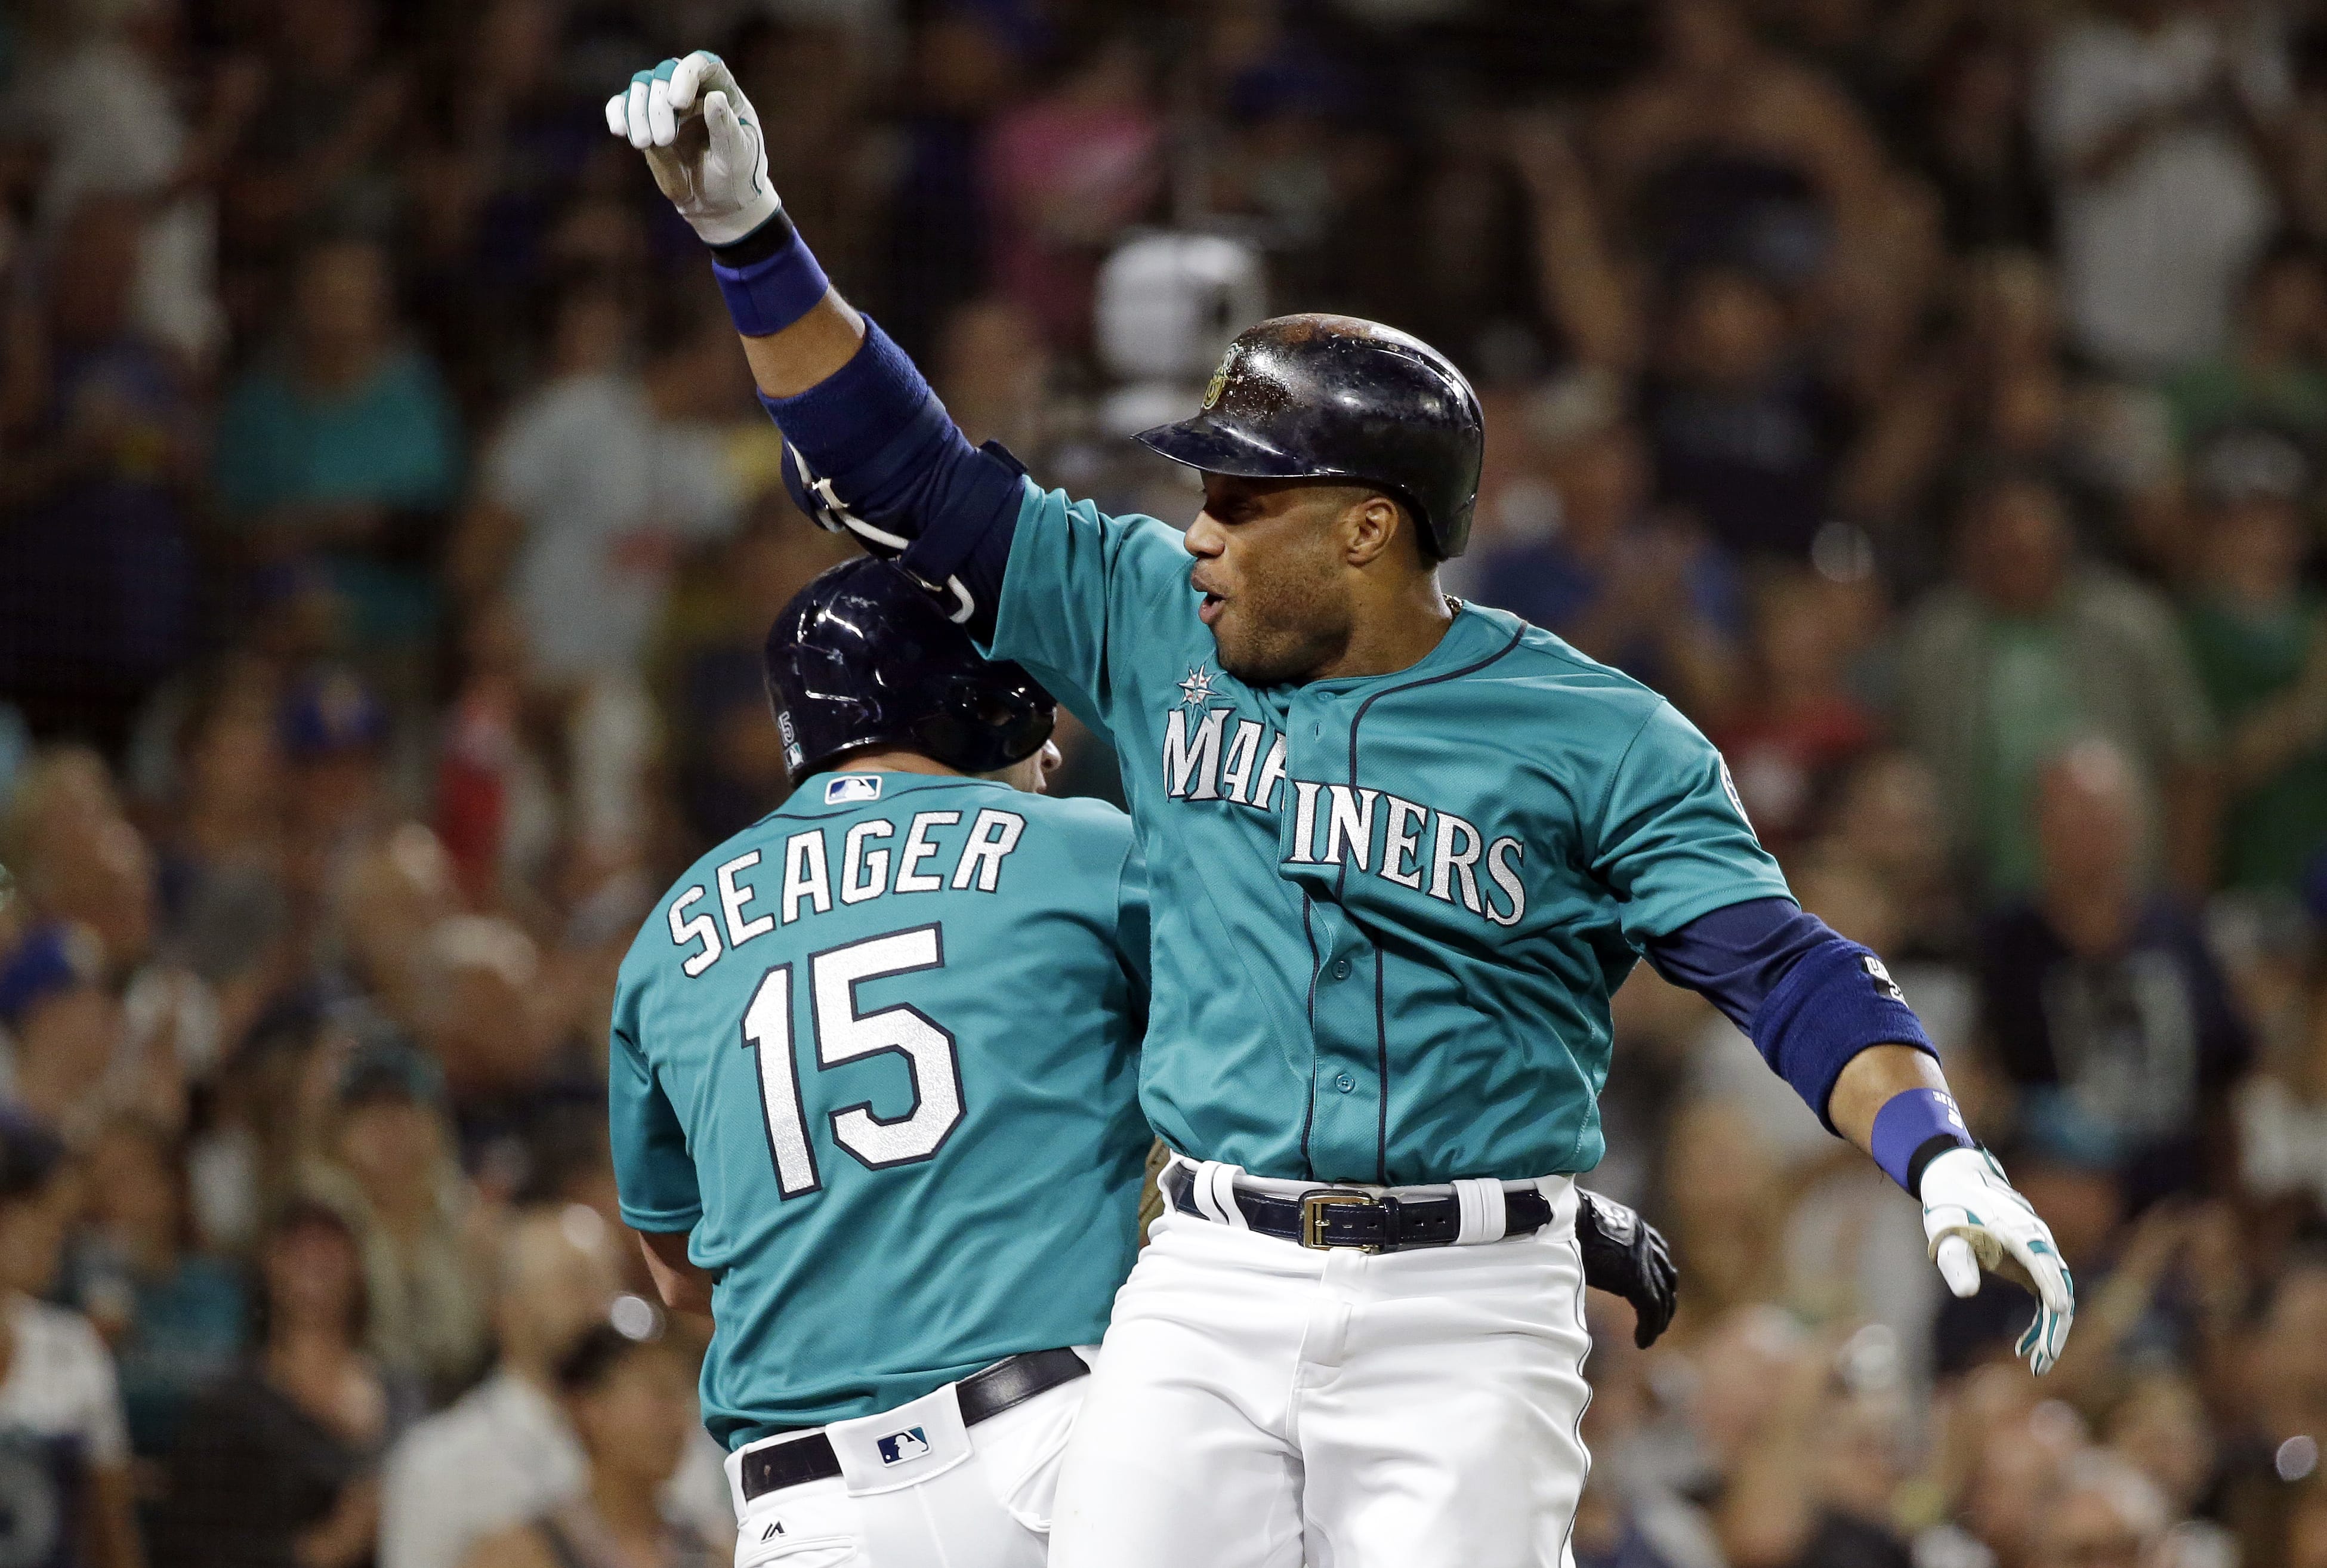 Seattle Mariners' Robinson Cano, right, celebrates with Kyle Seager after his two-run home run against the Milwaukee Brewers during the fifth inning of a baseball game Friday, Aug. 19, 2016, in Seattle.